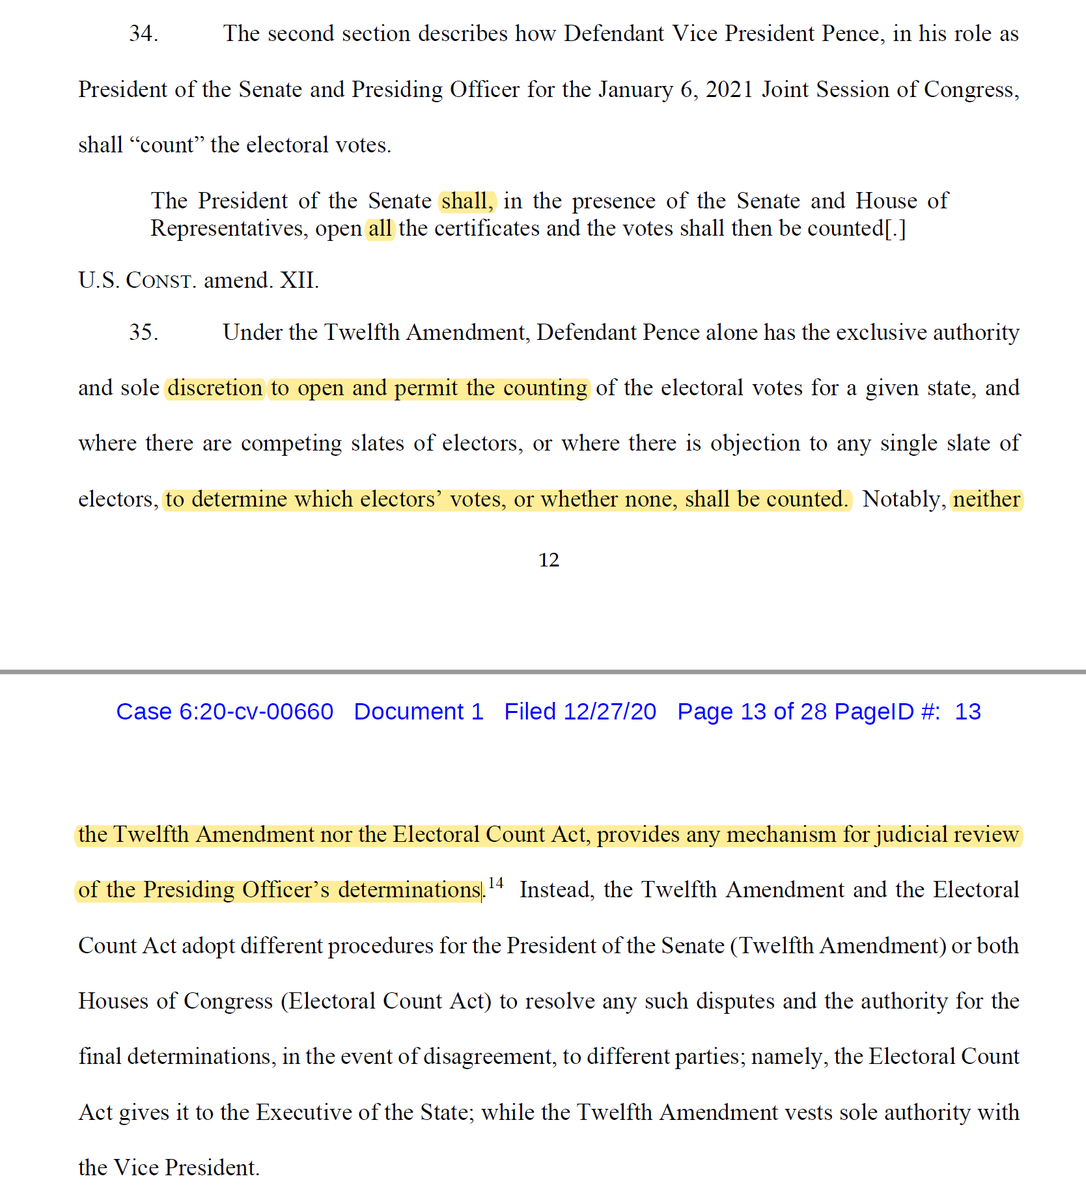 Lots of dumb here, too.1: It's very hard to get from the text of an Amendment that says that the Vice President *shall* *open all* the certificates and the argument that the Vice President has "sole discretion to open and permit the counting."